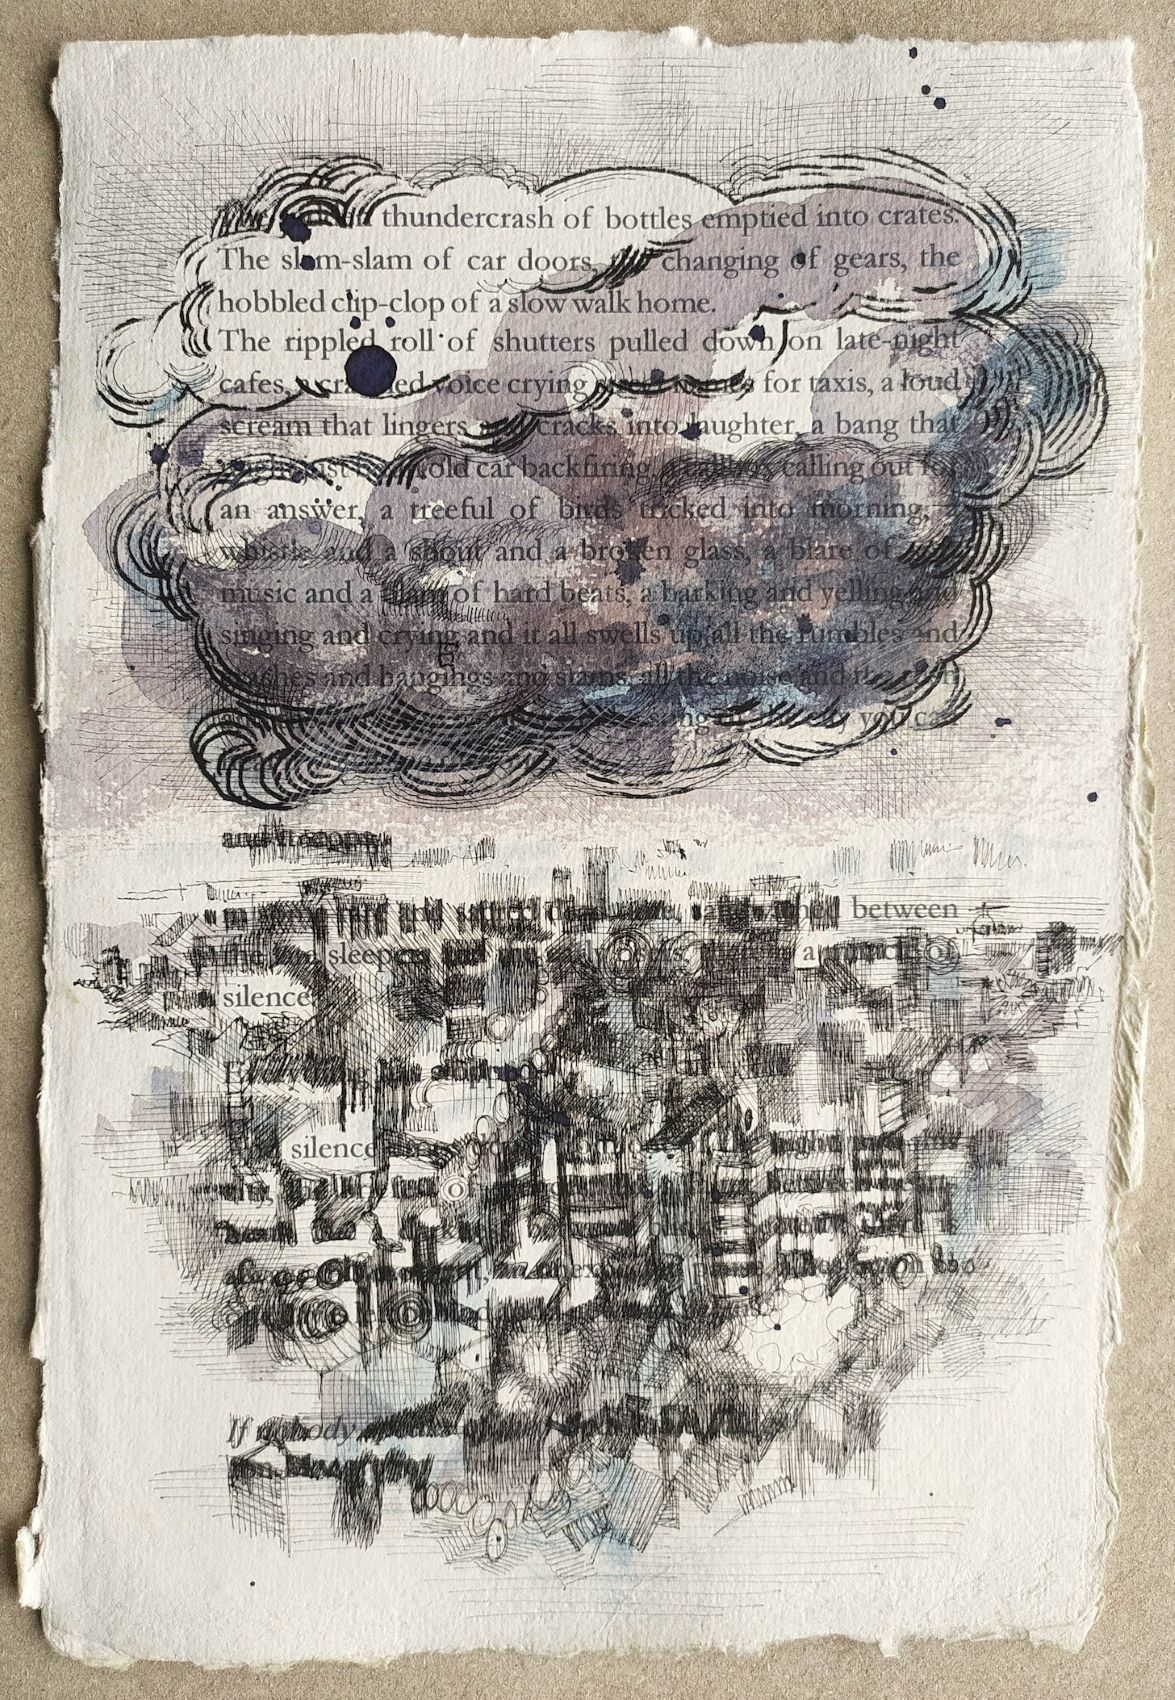 Silence drops down_Watercolour and digitally printed text on handmade paper_12h x 8w inches_2020